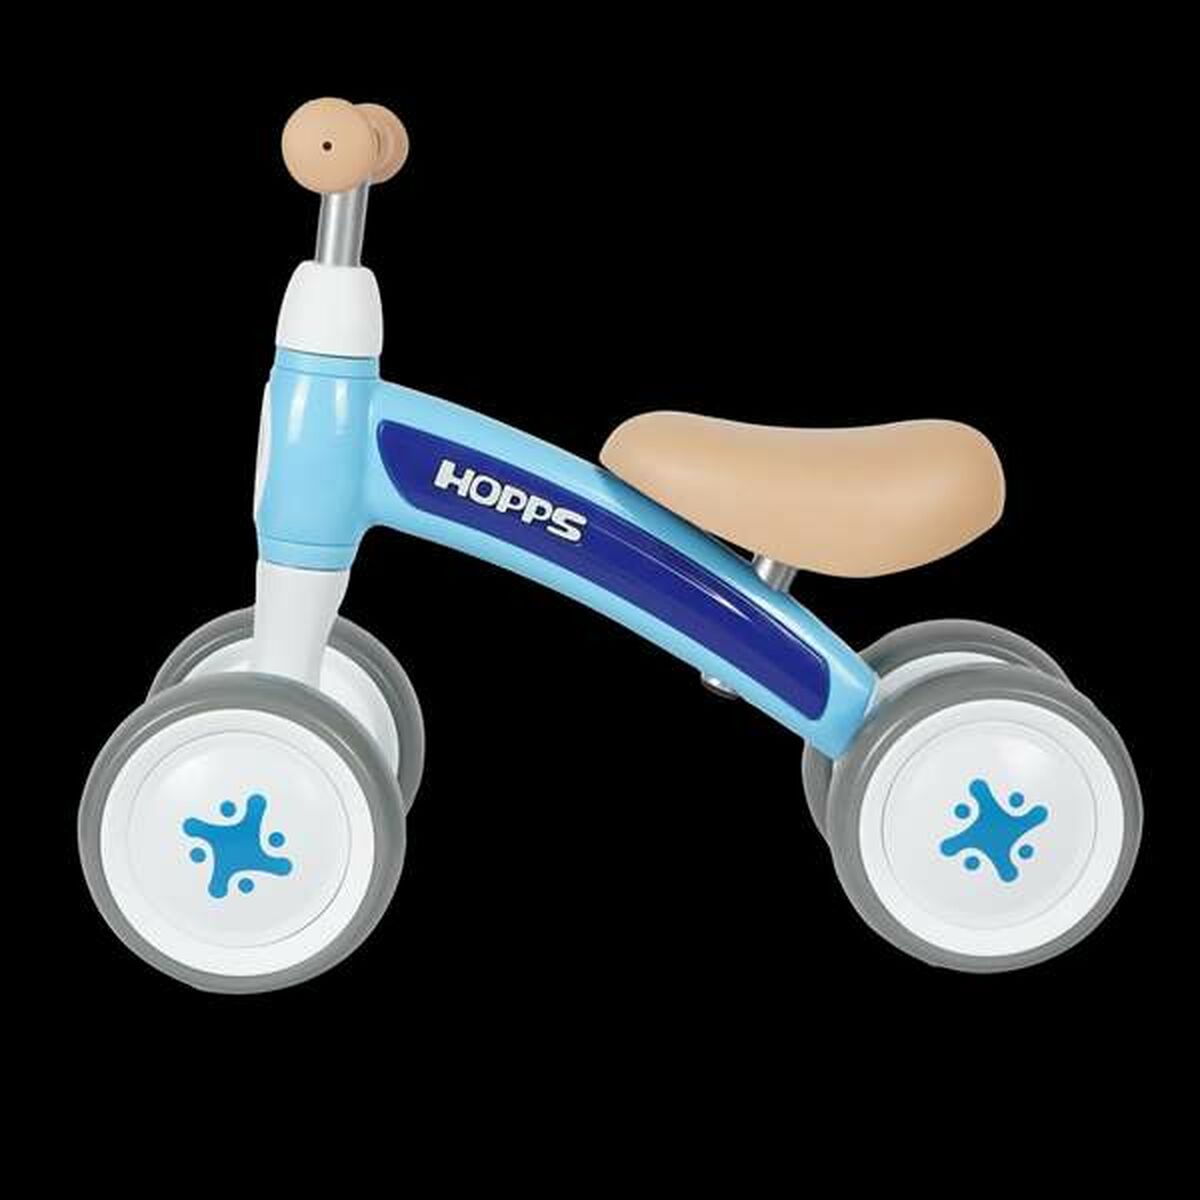 Children's Bike Baby Walkers Hopps Blue Without pedals